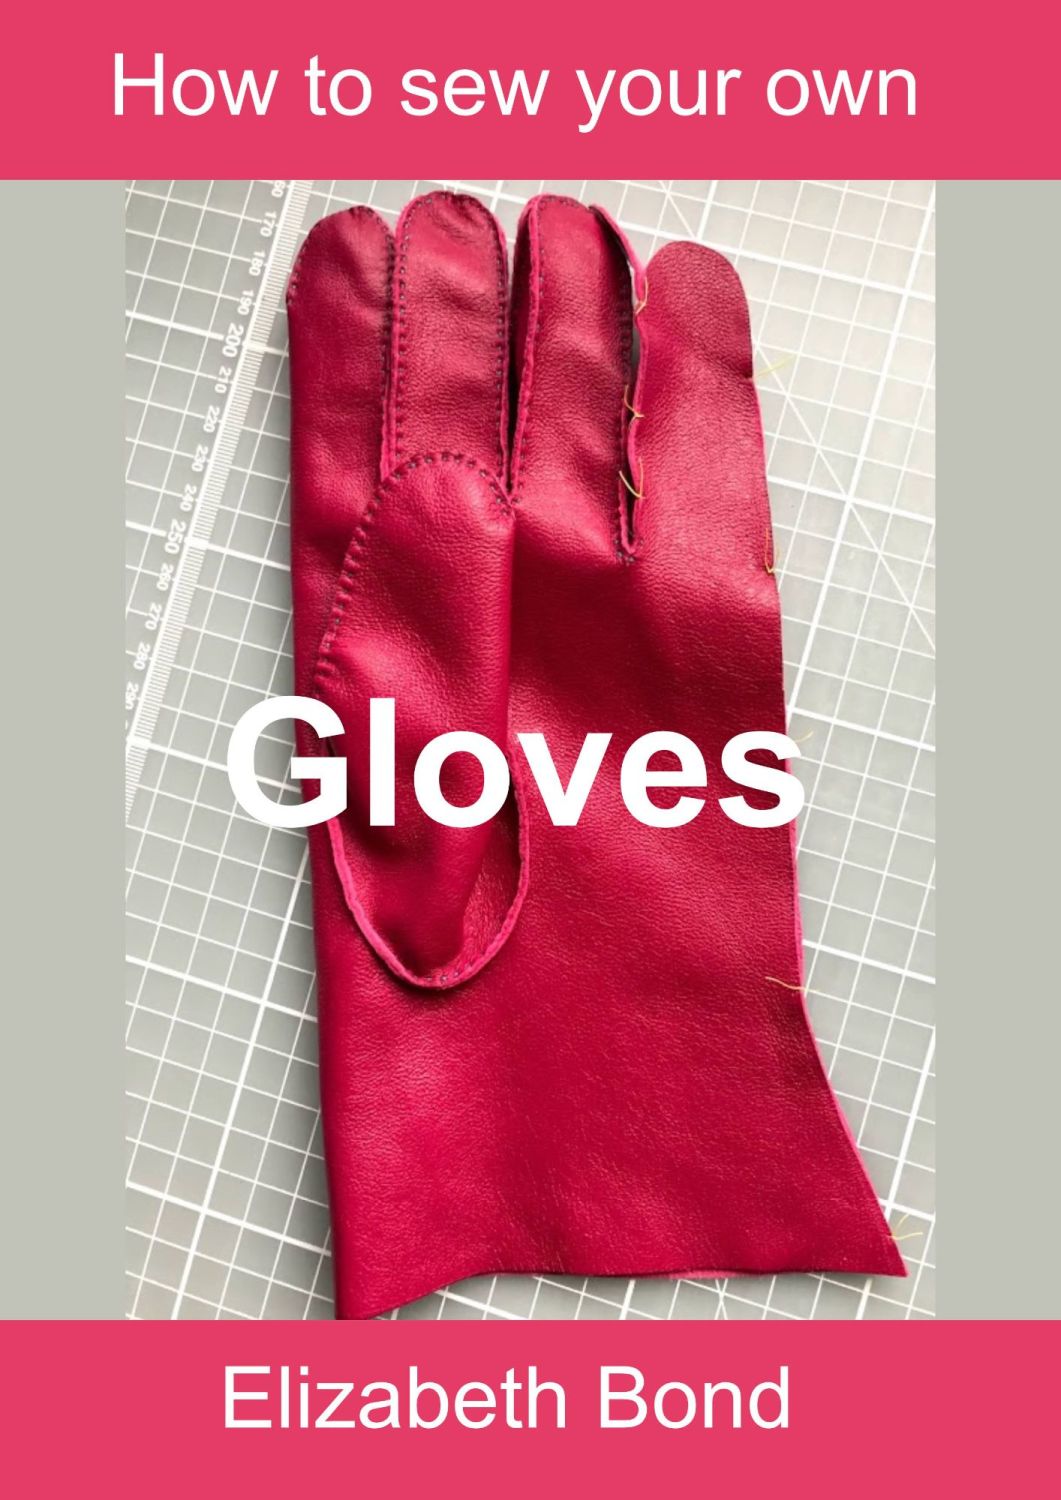 Sewing Your Gloves